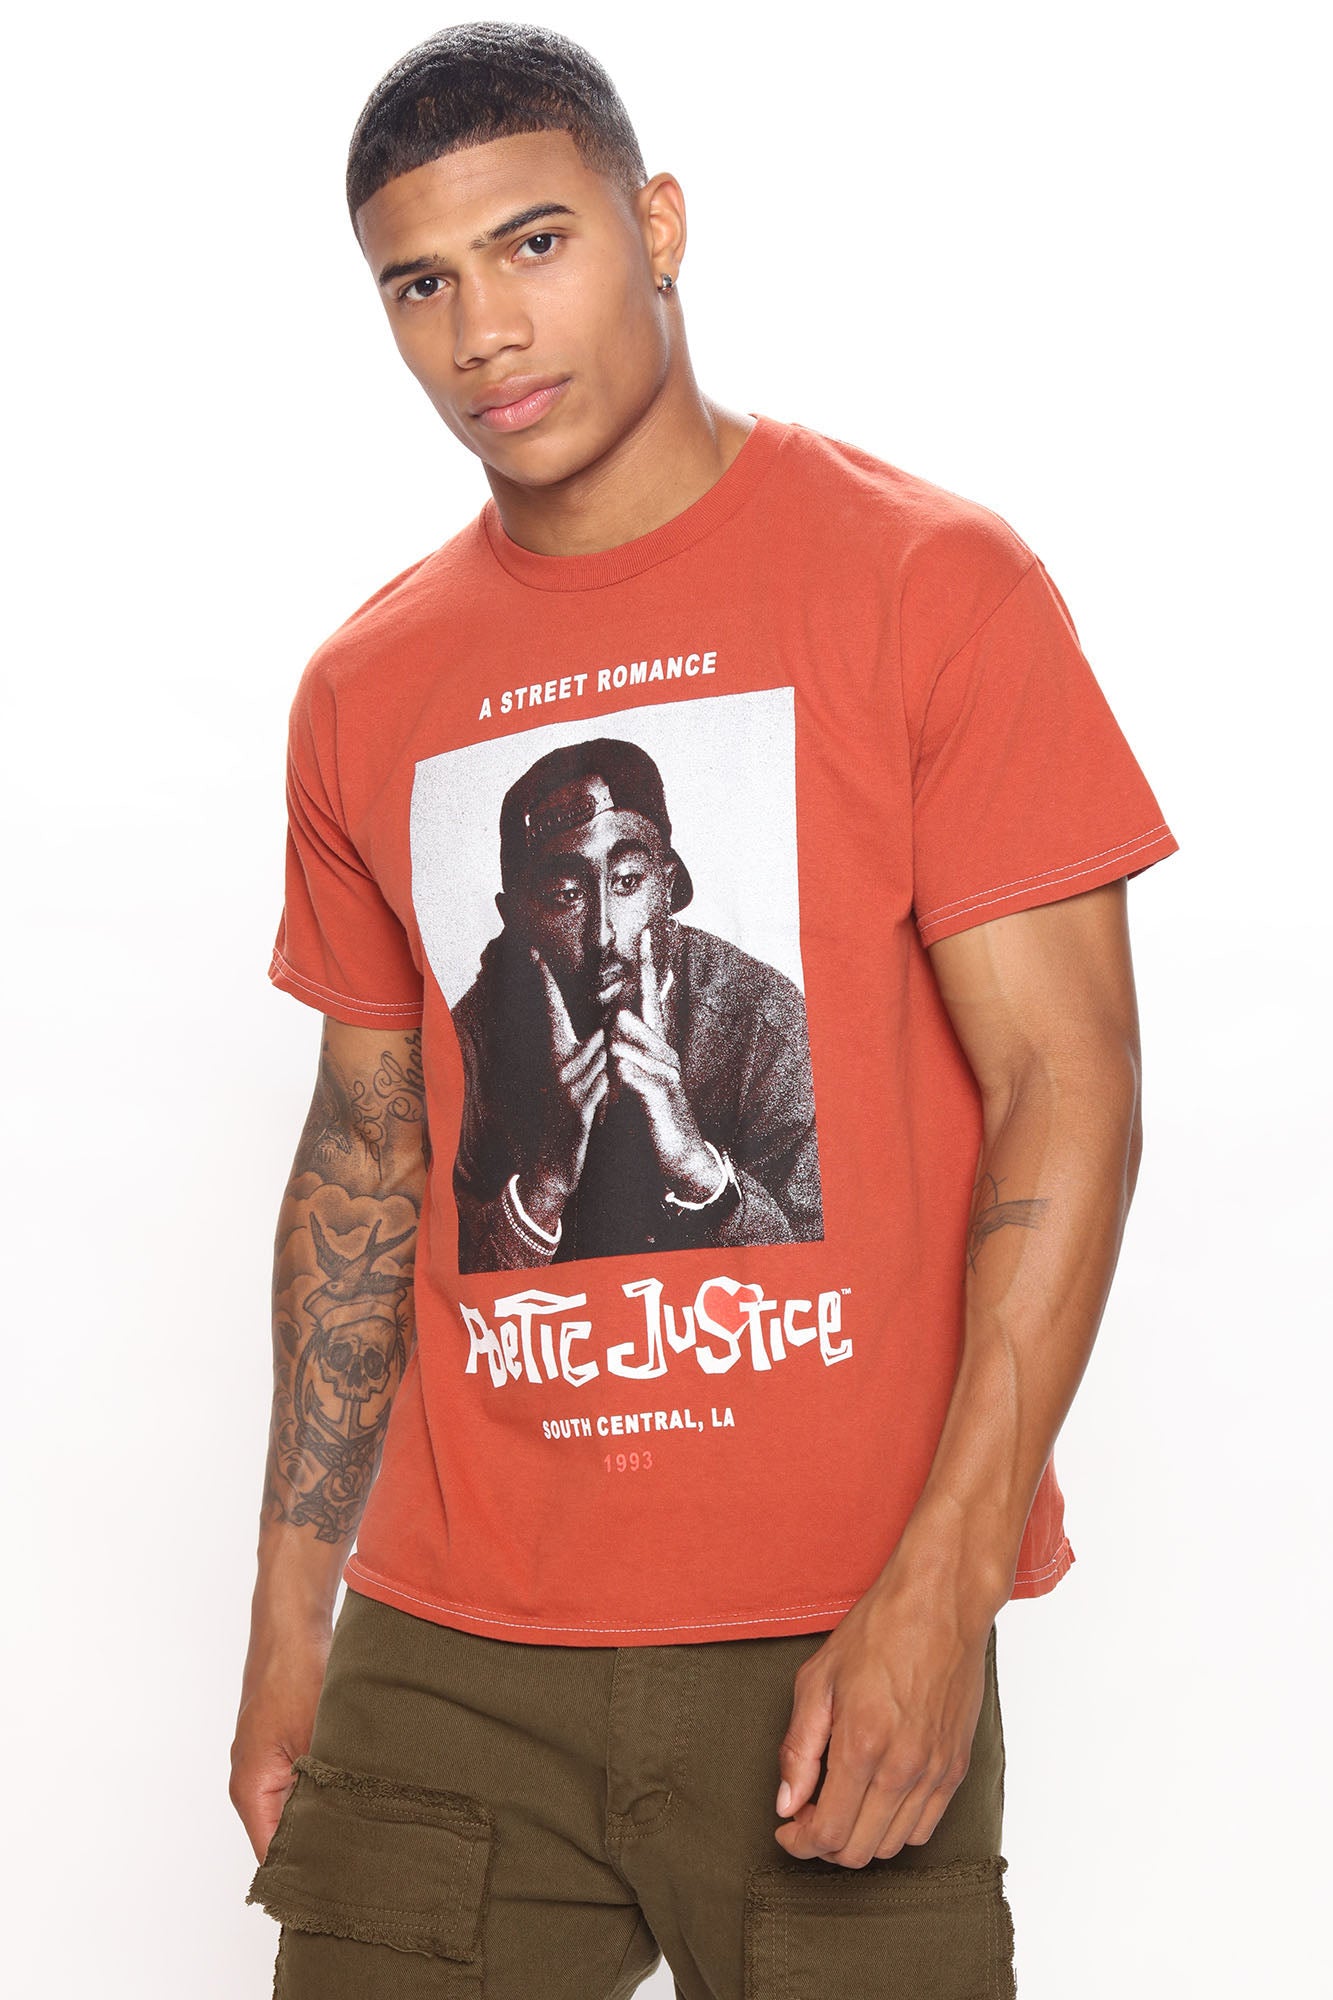 Poetic Justic/Tupac Red T-Shirt $230 Available in S/M/L/XL/XXL